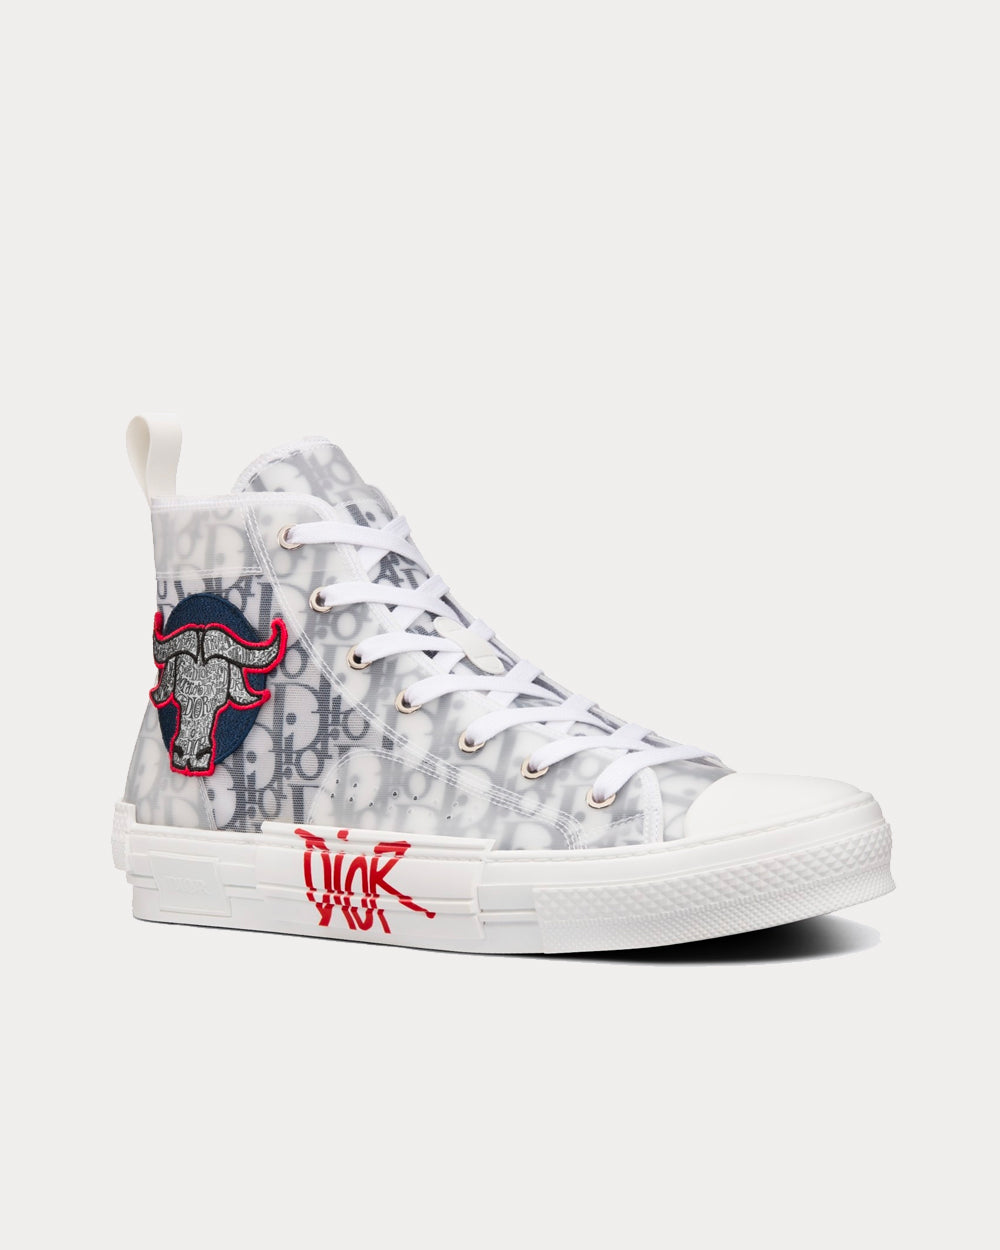 Dior x Stussy B23 SHAWN Ox Head Embroidery Patch White High Top 